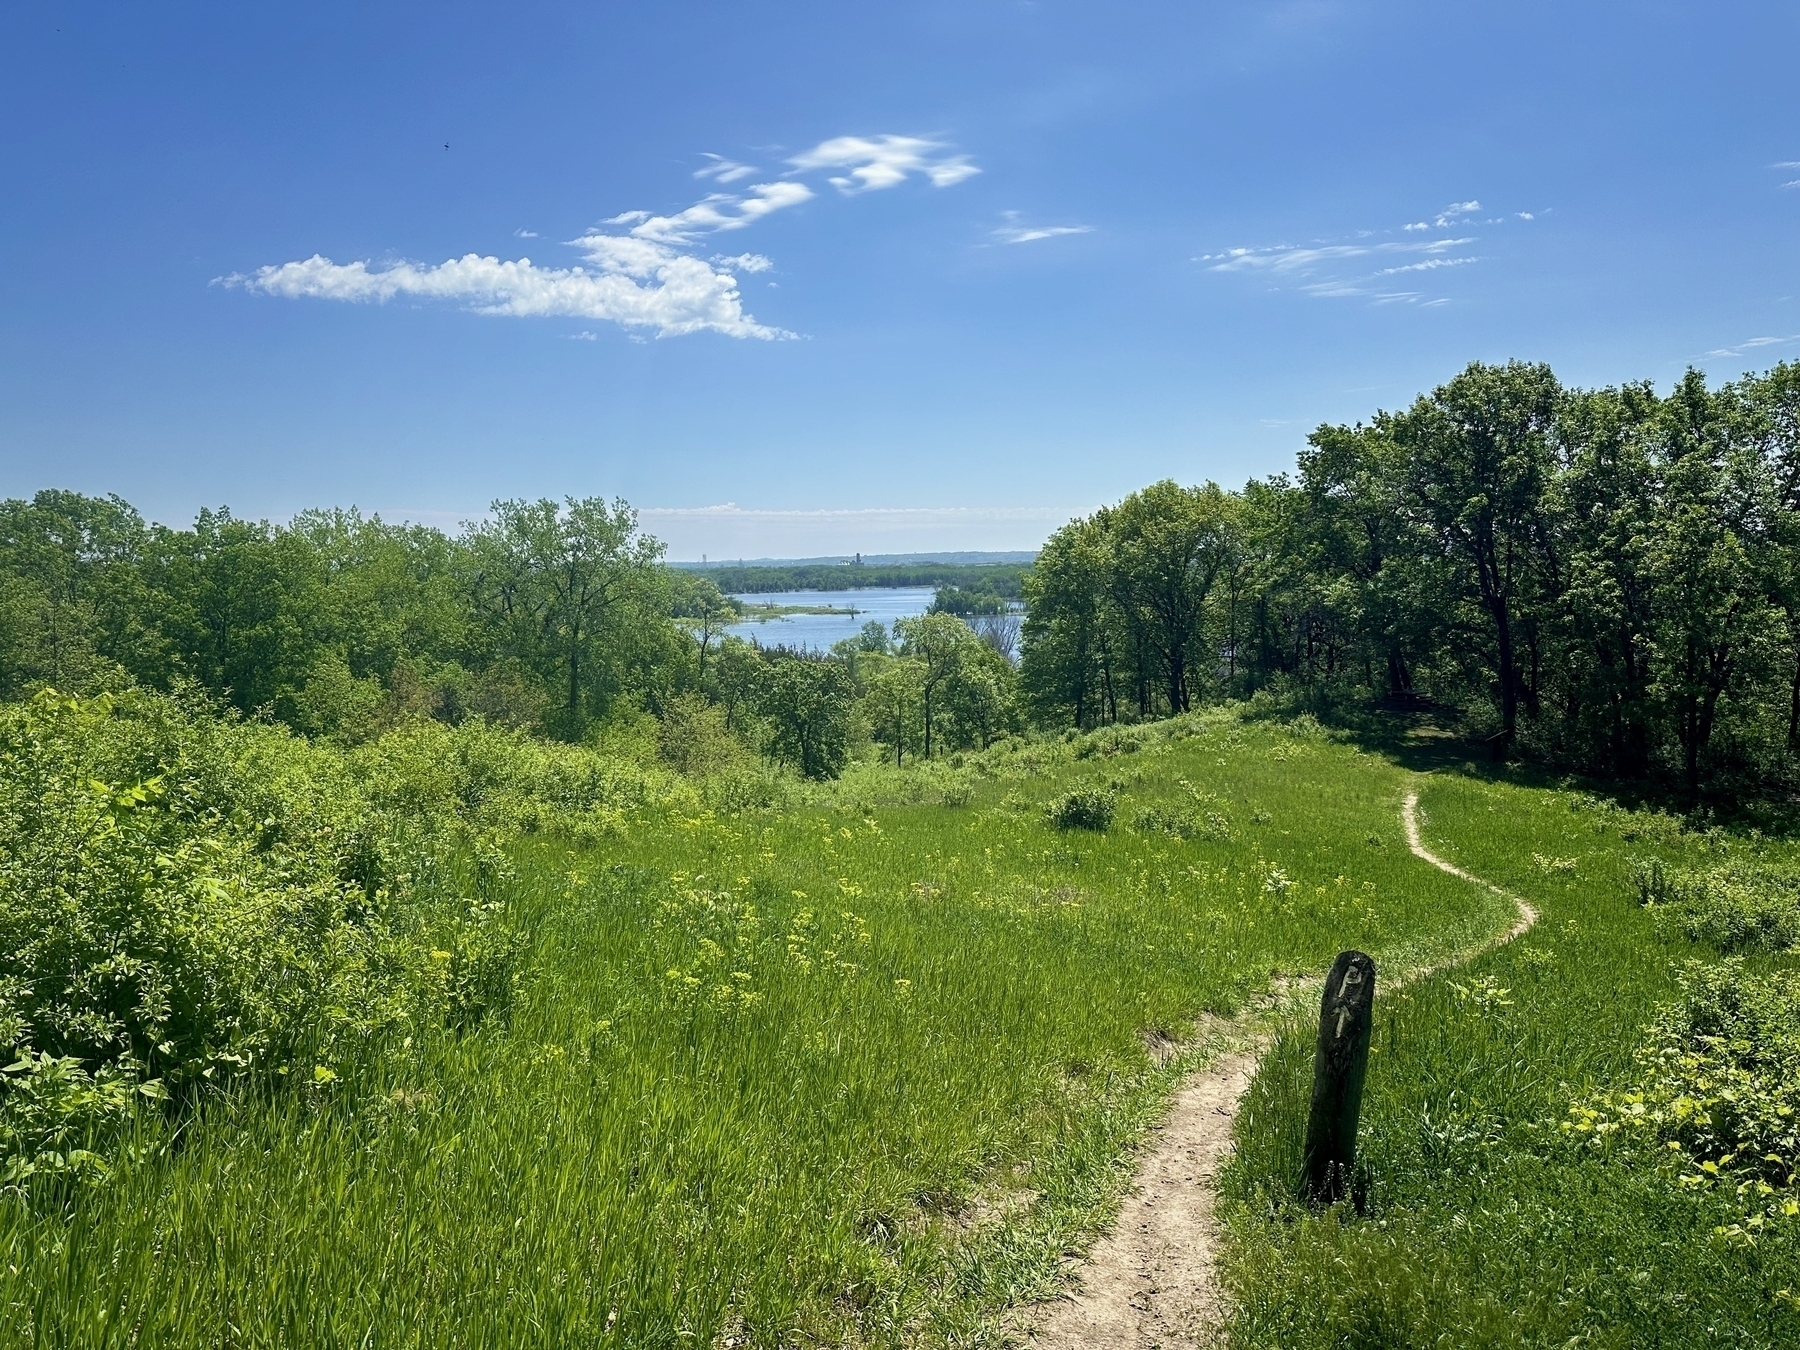 A narrow dirt path winds through a dense green meadow surrounded by trees on a bright sunny day with a river visible in the distant background under a clear blue sky.